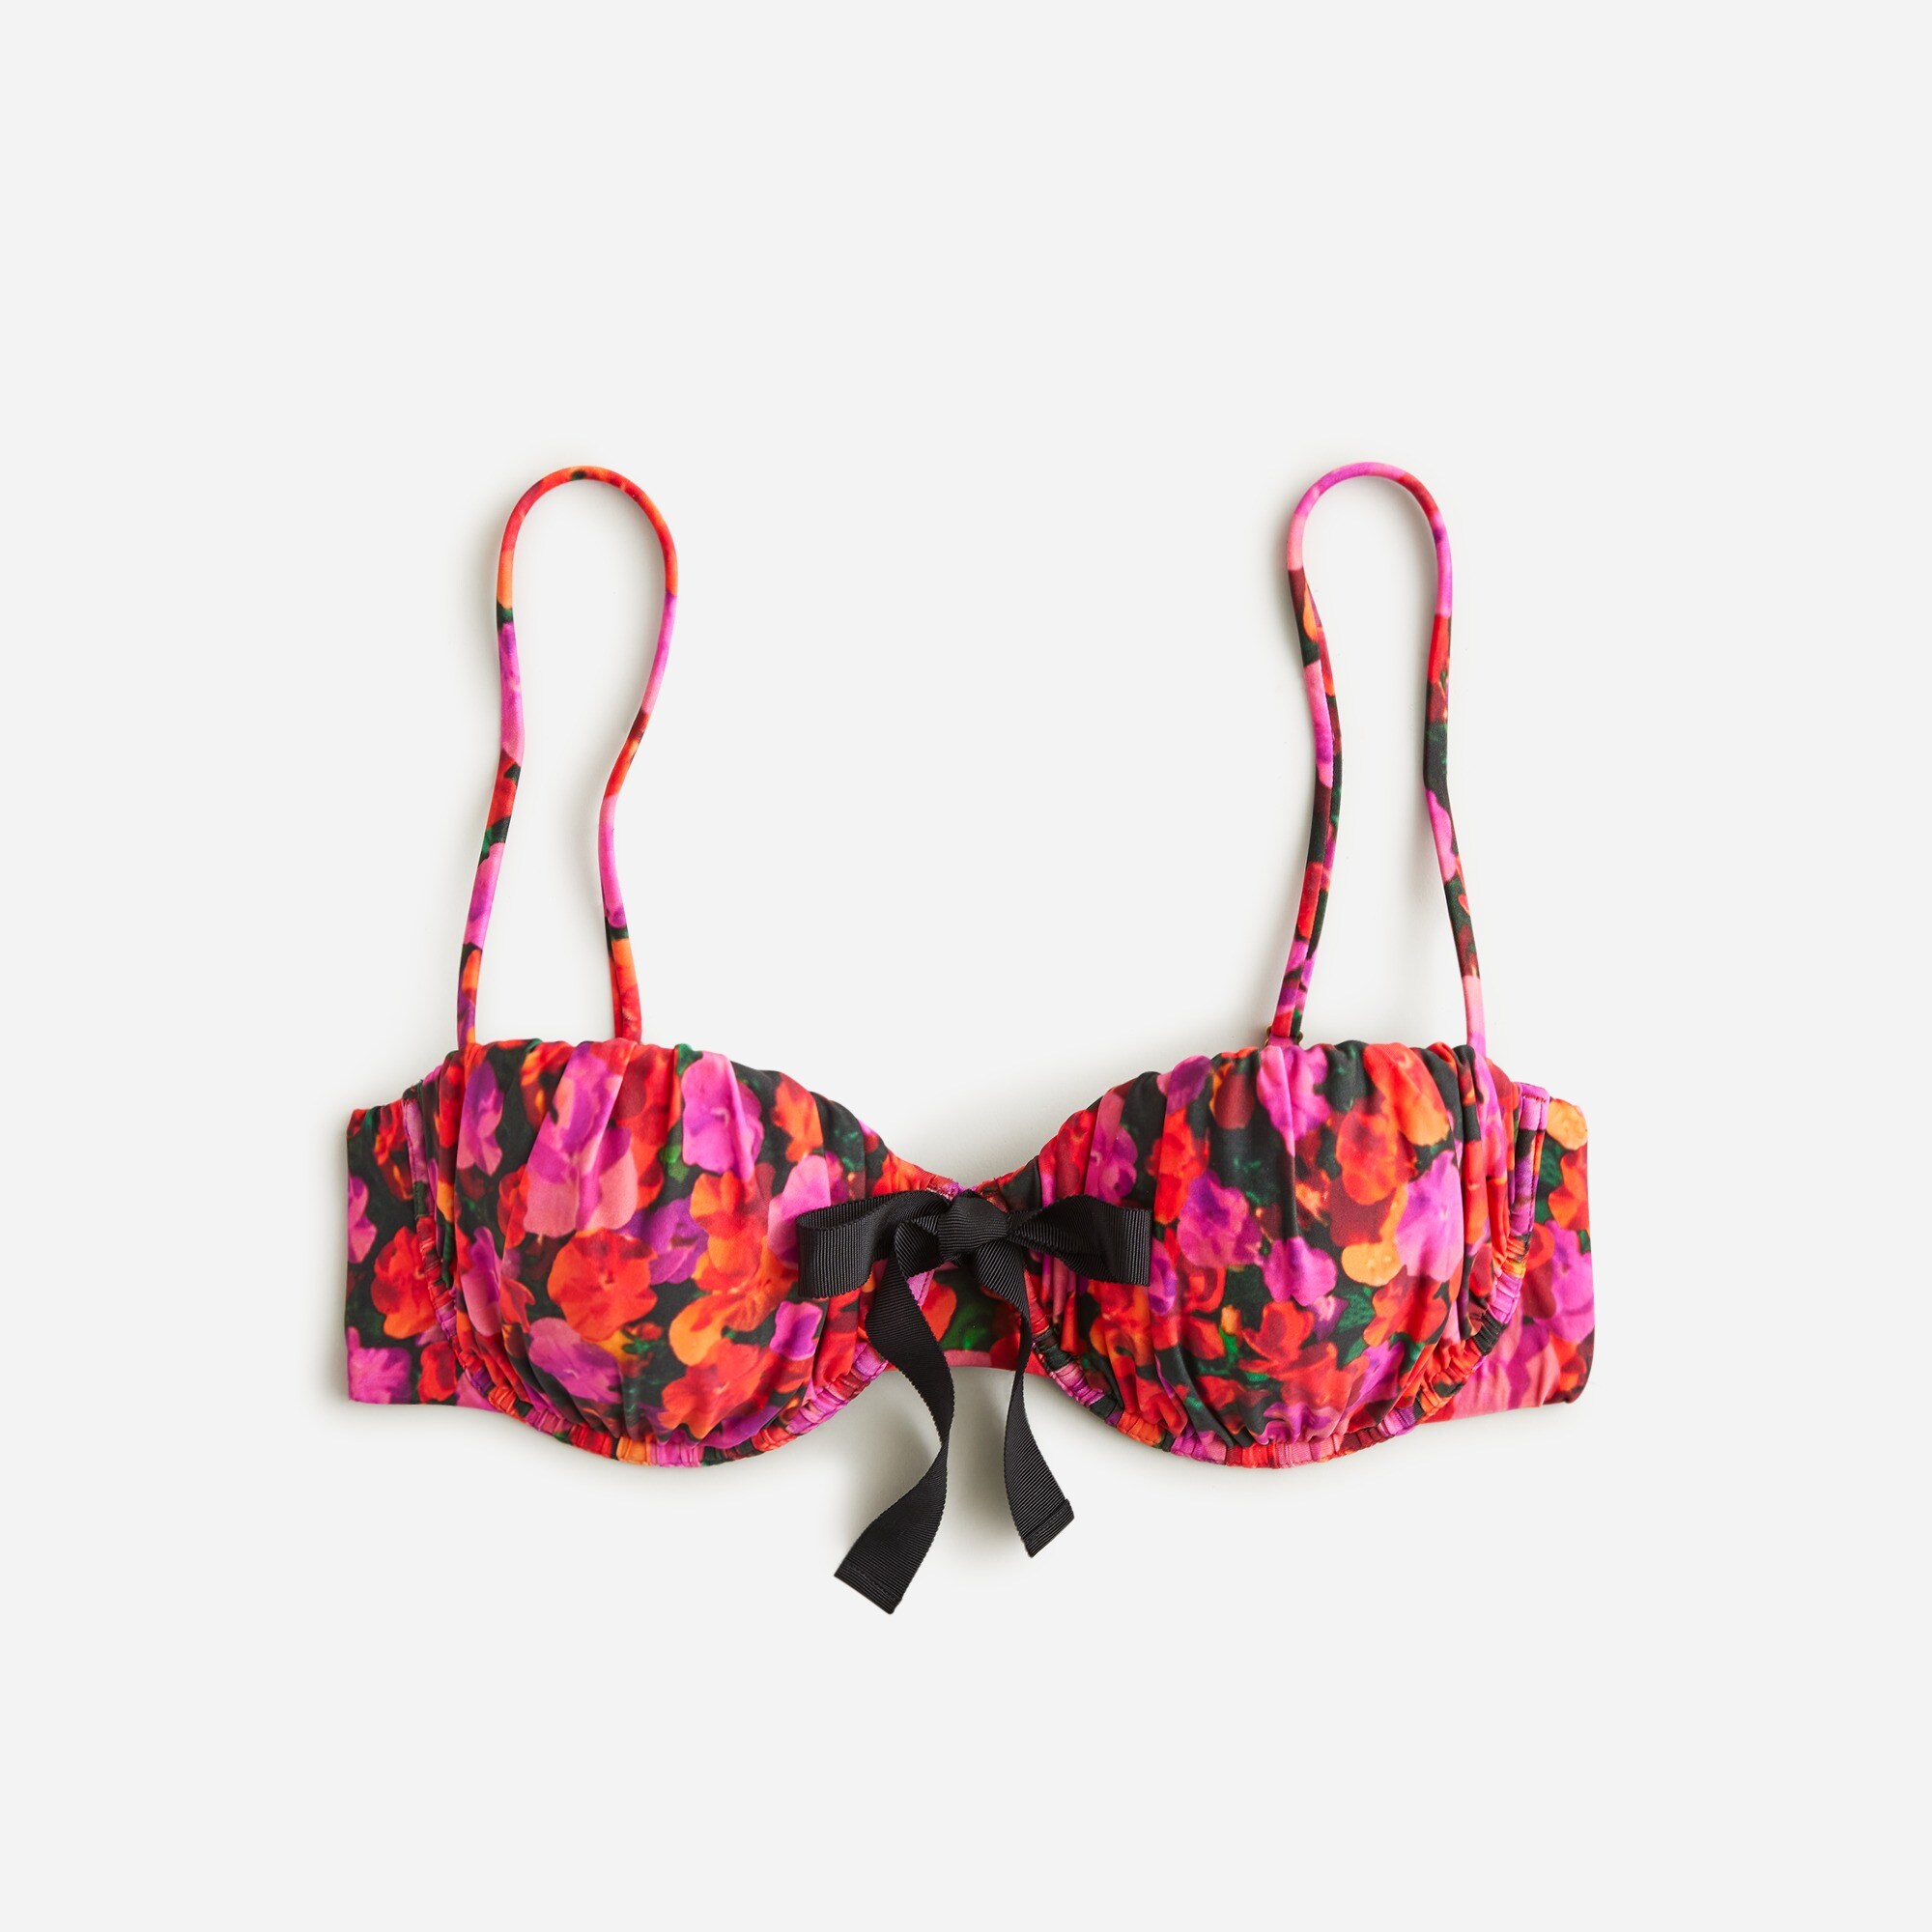  Ruched balconette bikini top in pansy floral